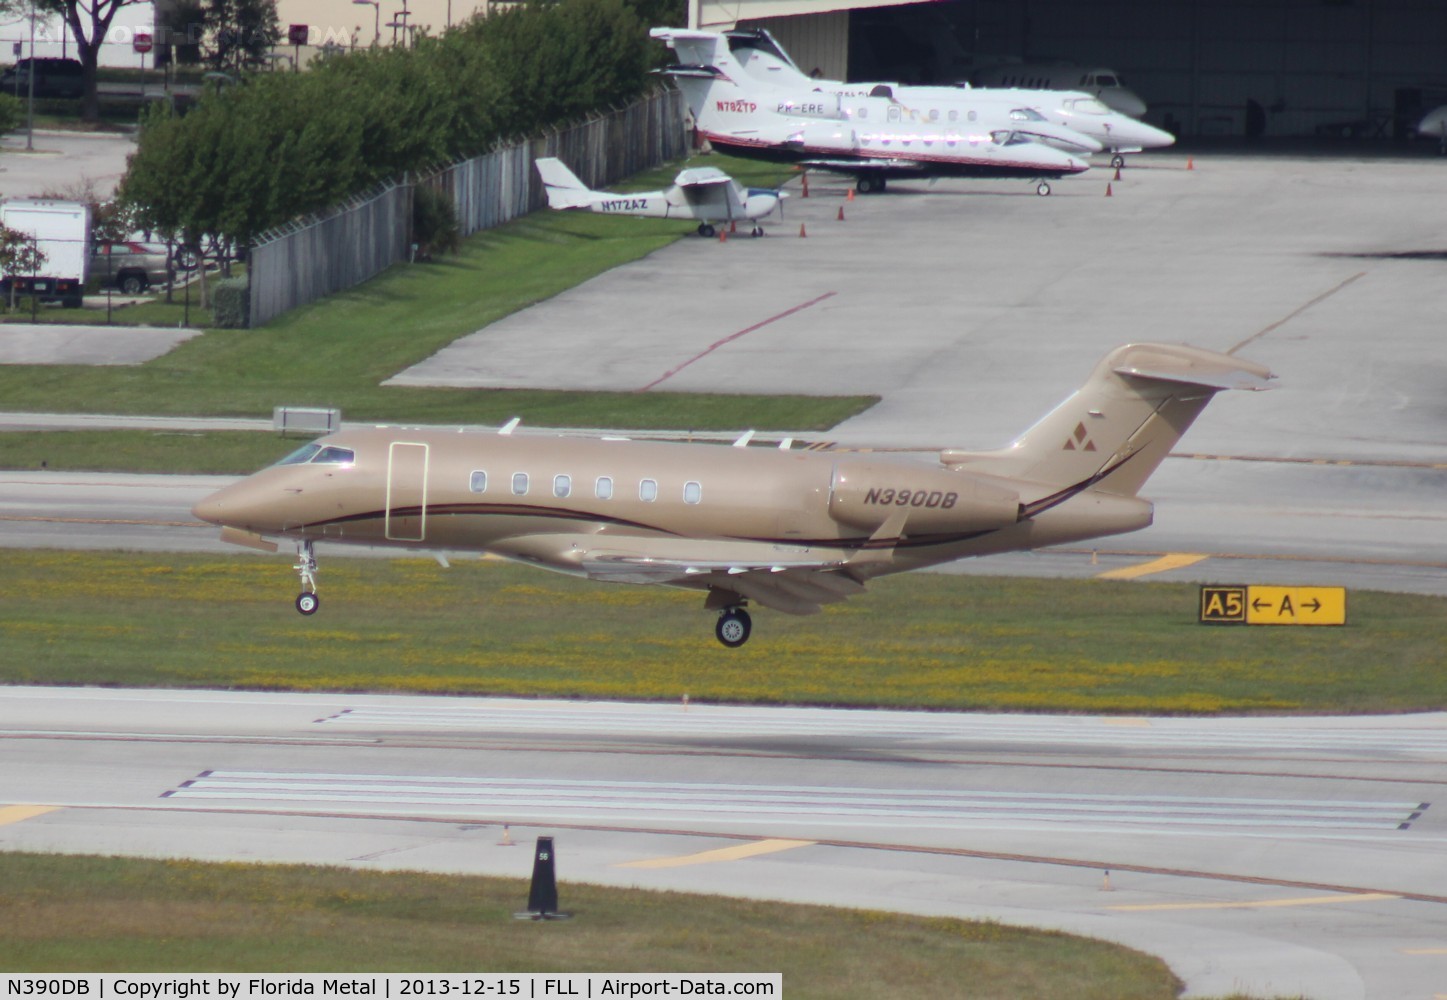 N390DB, 2006 Bombardier Challenger 300 (BD-100-1A10) C/N 20131, Challenger 300